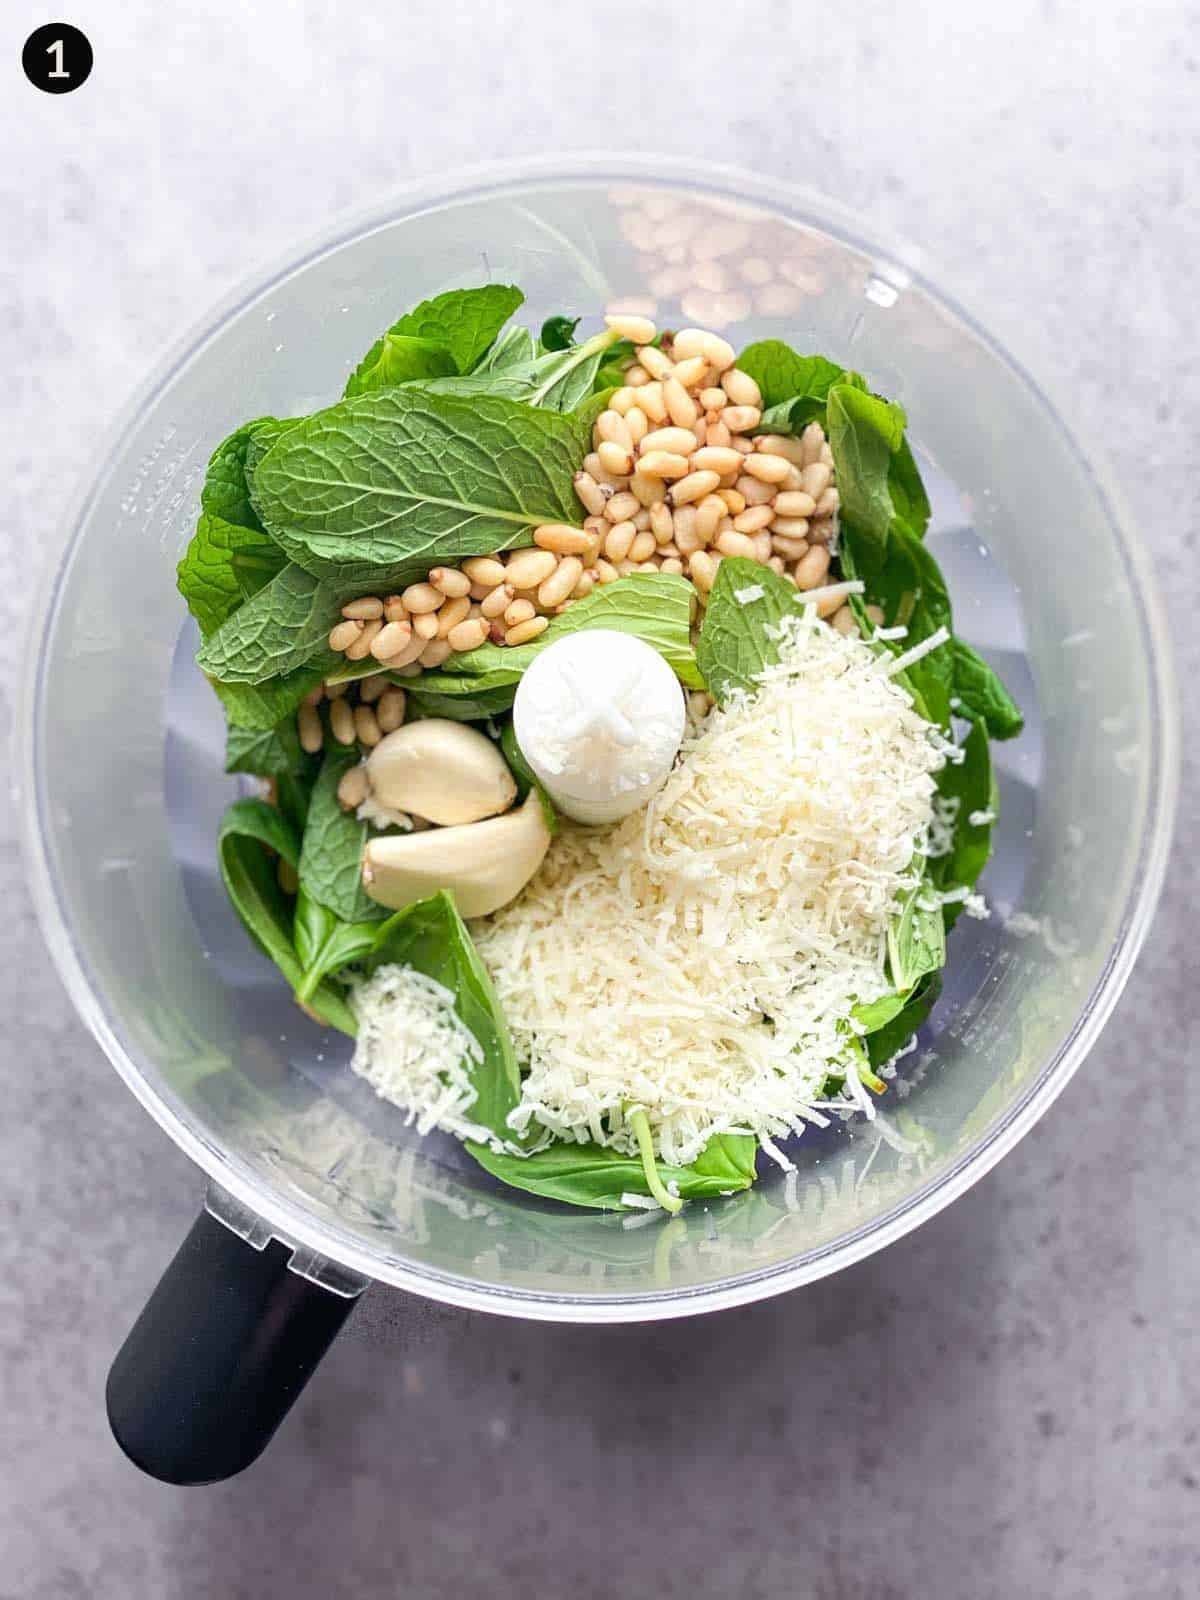 Ingredients for basil mint pesto in a food processor